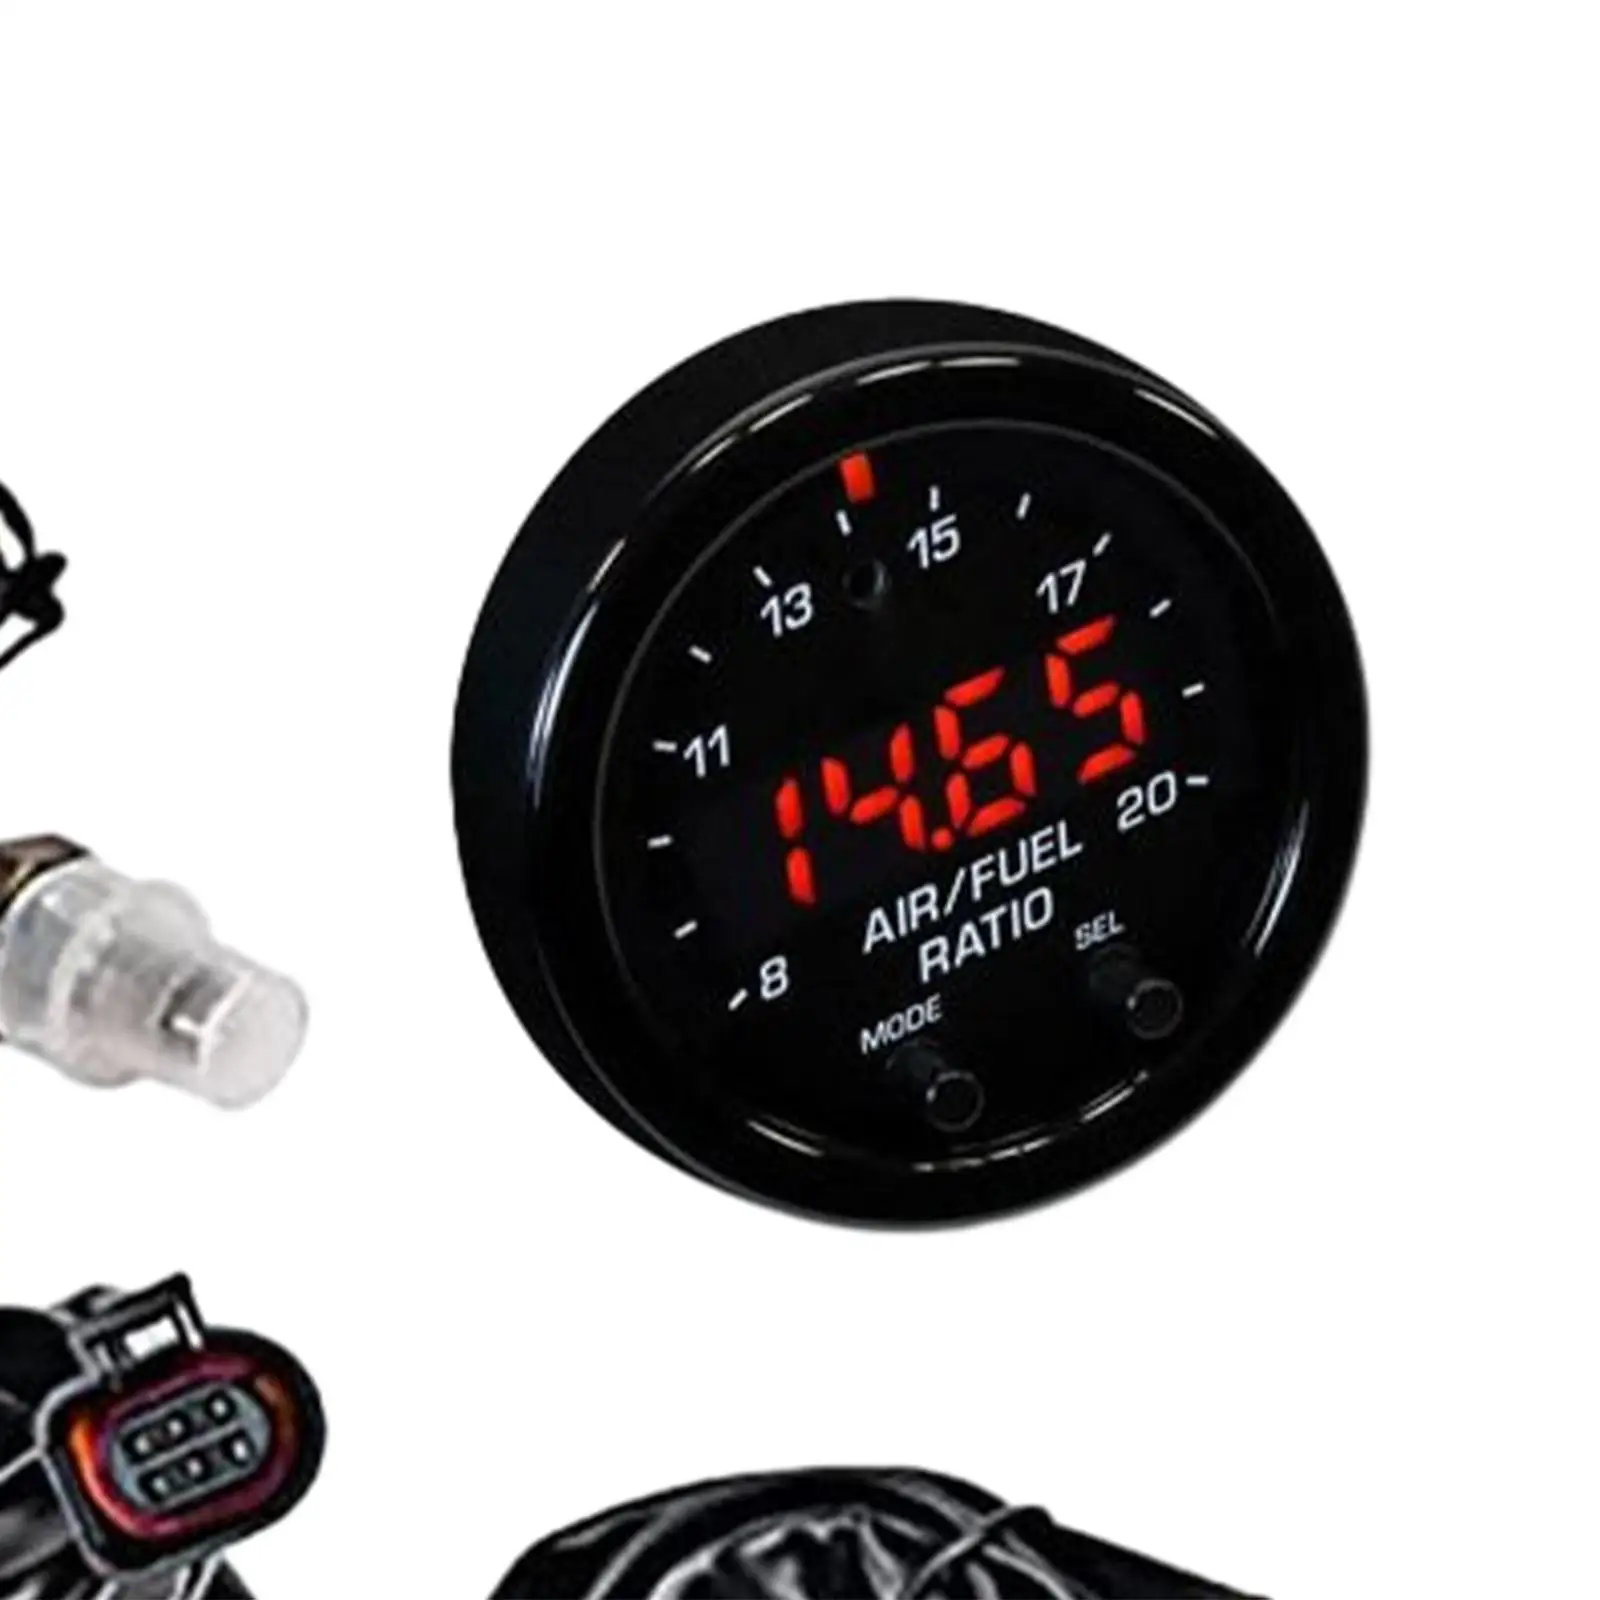 30-0300 x Series Afr Gauge Set Replacement Repair Parts Accessories 52mm 2.04inch Uego Air Fuel Ratio Gauge Set Easy Install